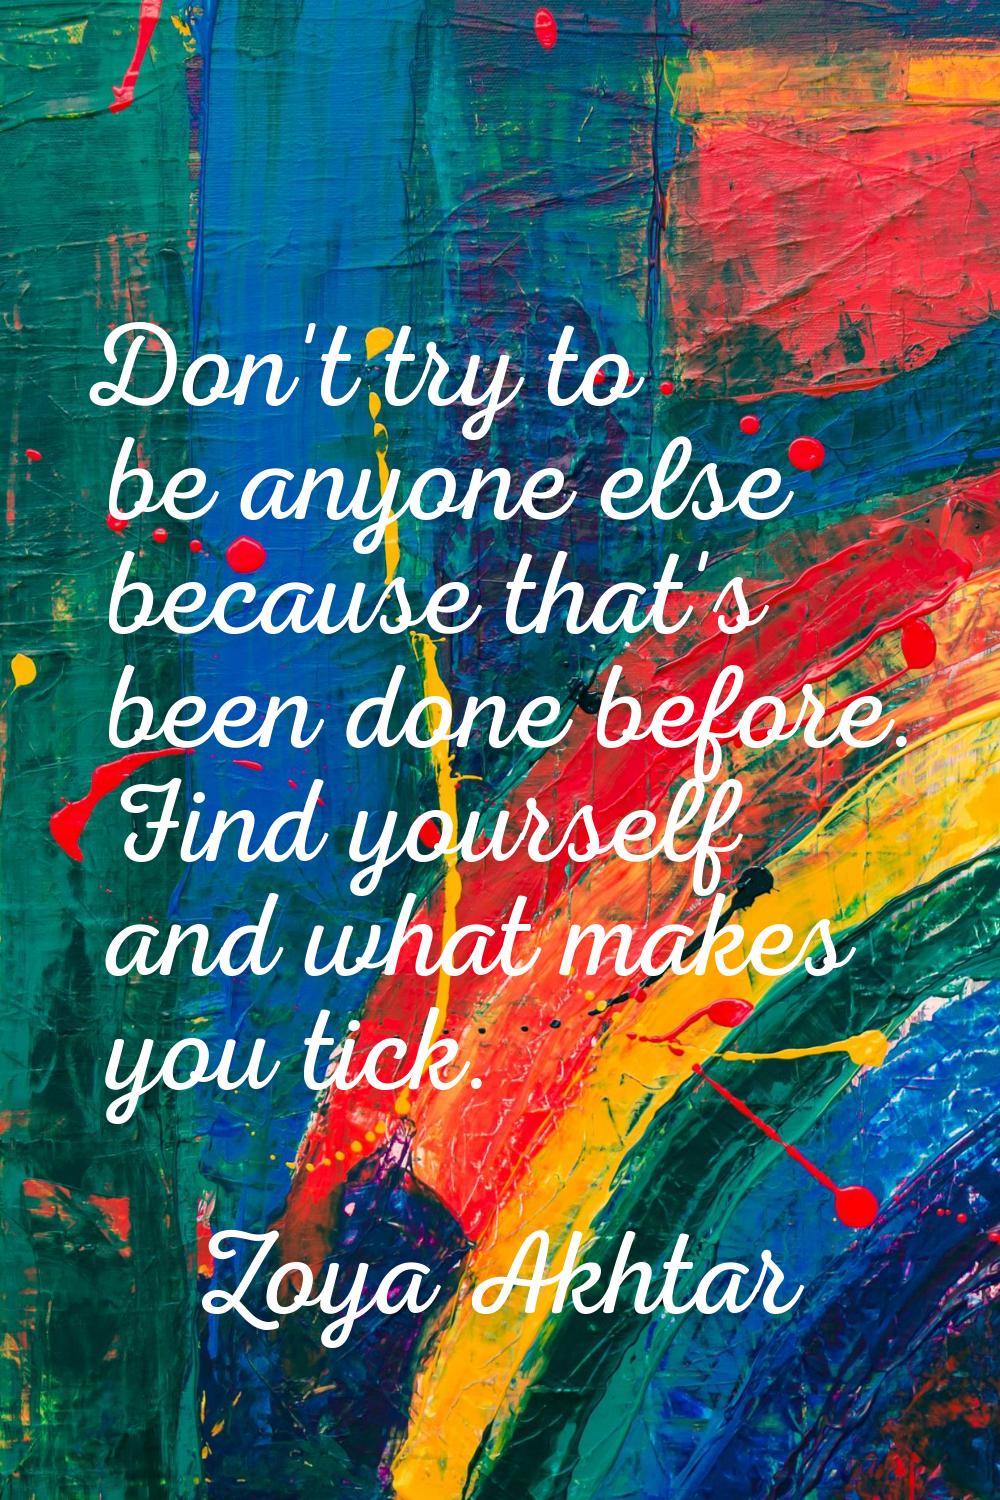 Don't try to be anyone else because that's been done before. Find yourself and what makes you tick.